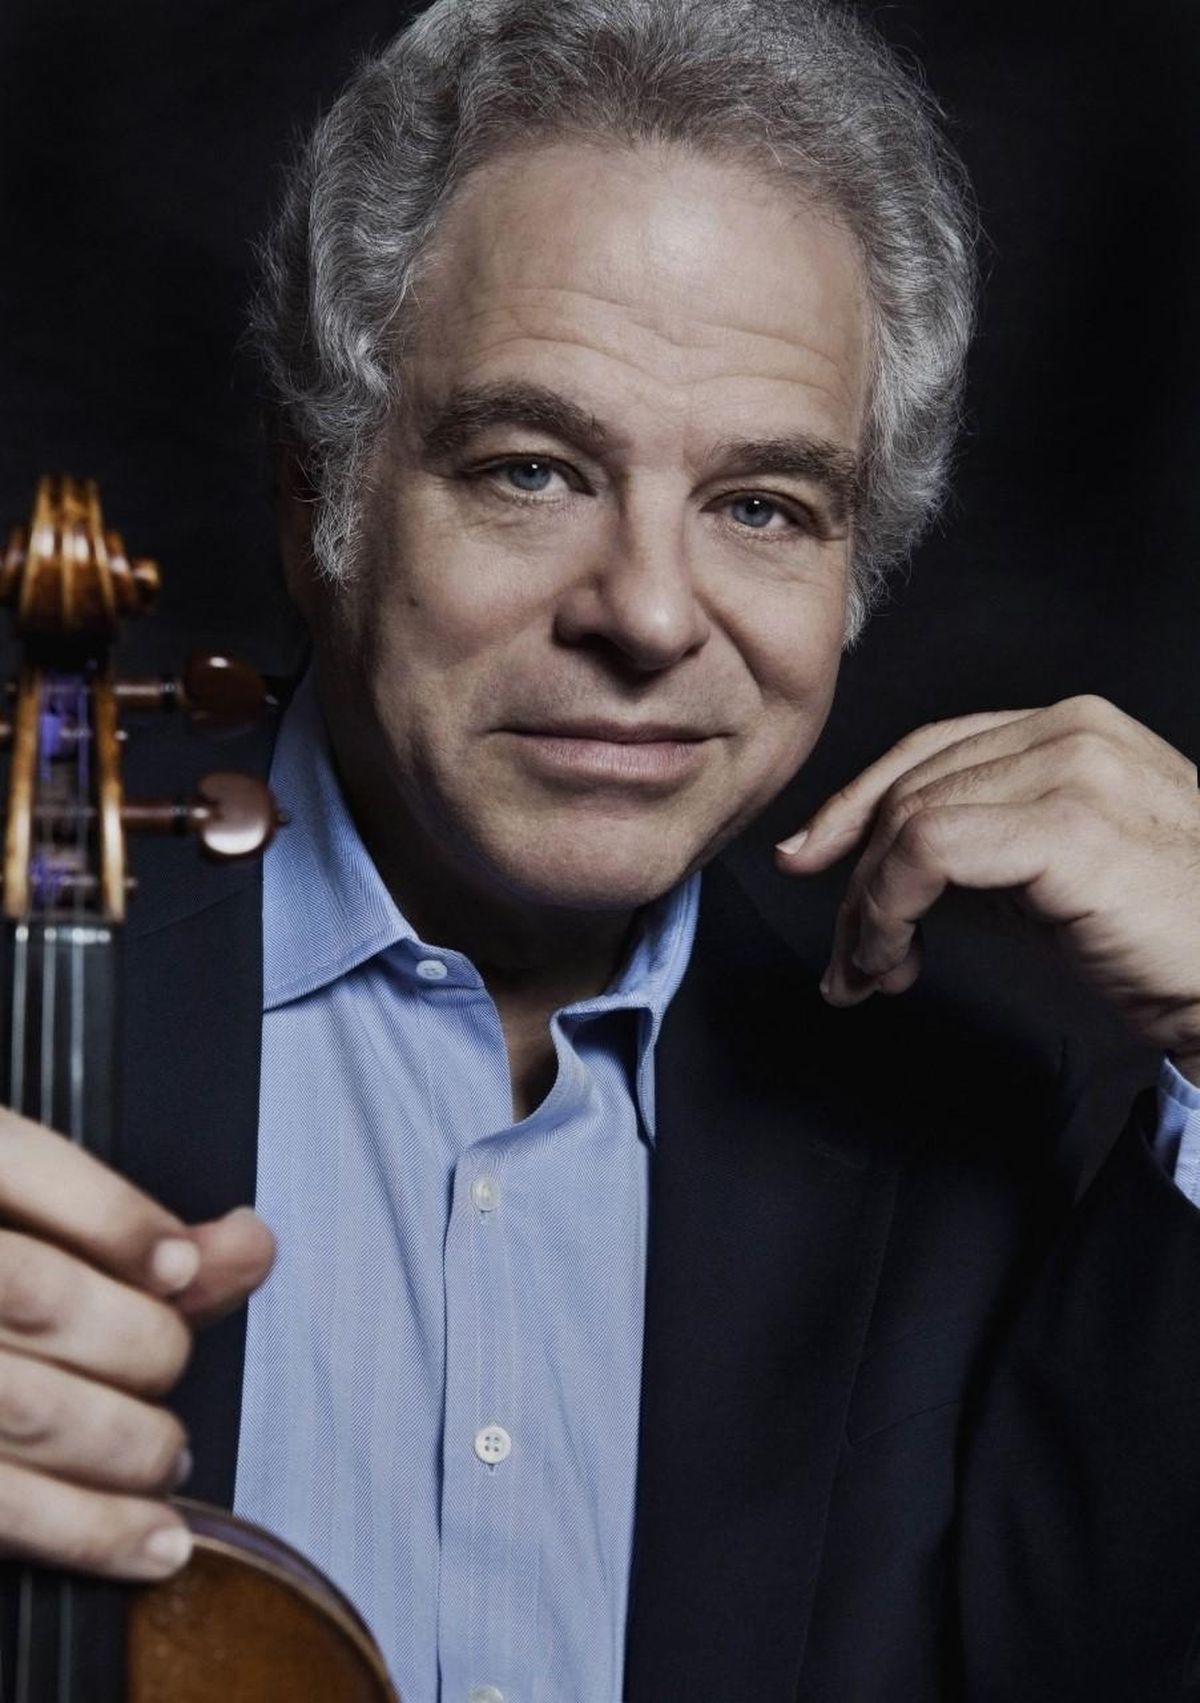 Renowned violinist Itzhak Perlman will share stories and songs during a sold-out concert at the Martin Woldson Theater at the Fox on Monday. (Lisa Marie Mazzucco)